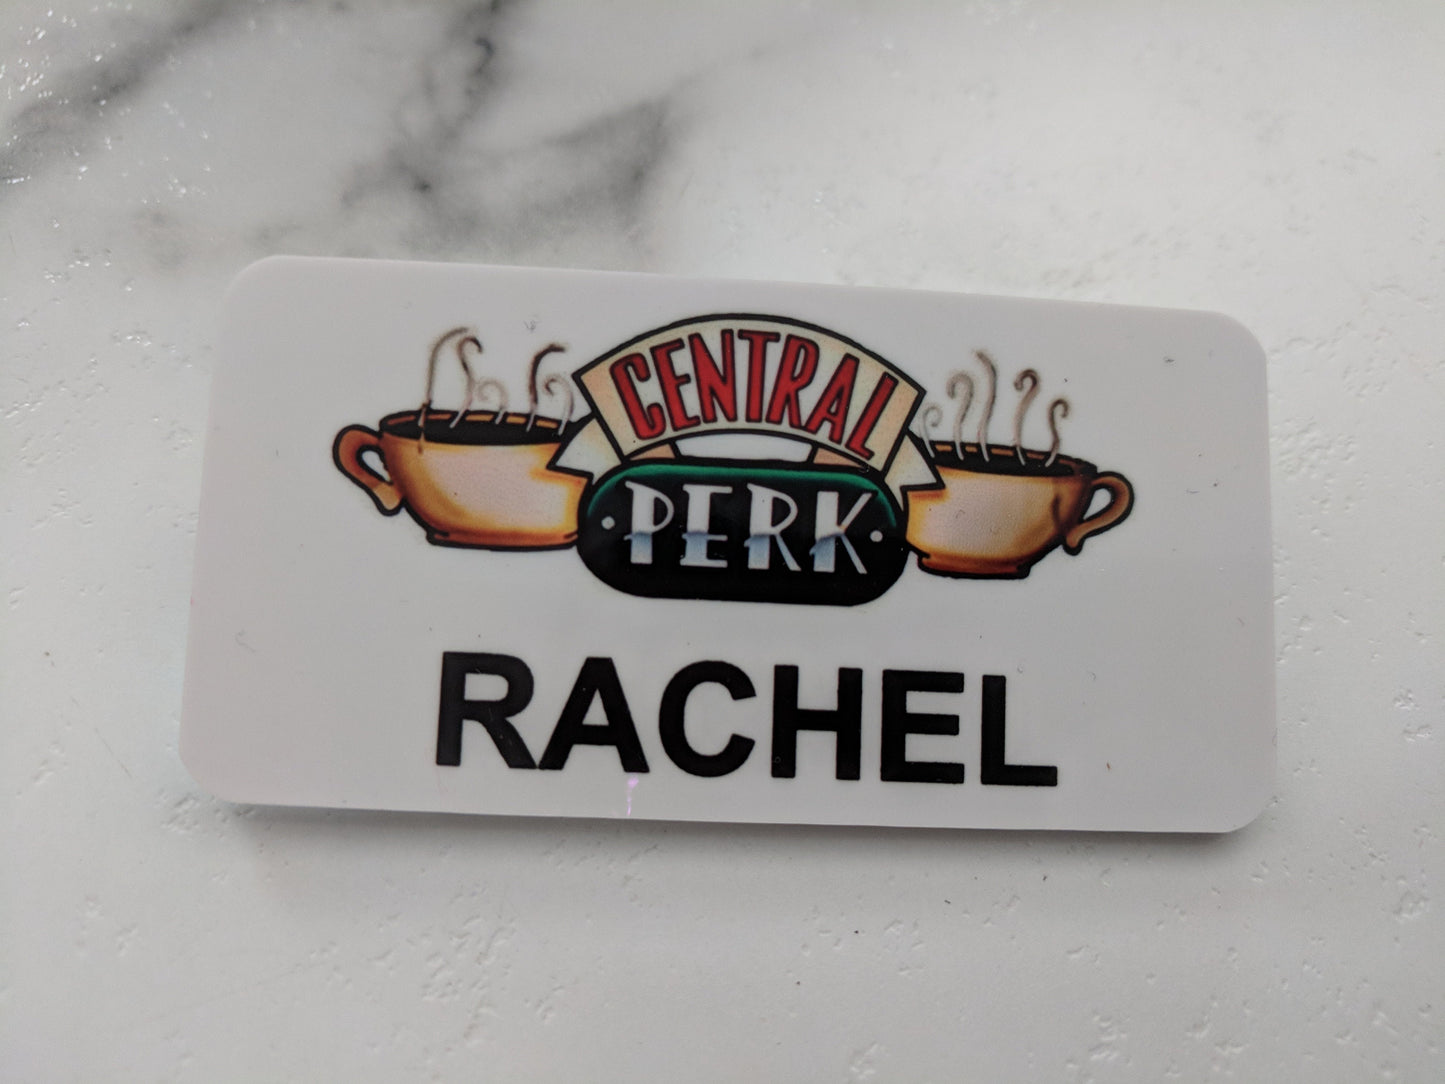 FRIENDS Central Perk Coffee Shop Name Badge Rachel Gunther for Cosplay, Halloween, Comicon Jennifer Aniston